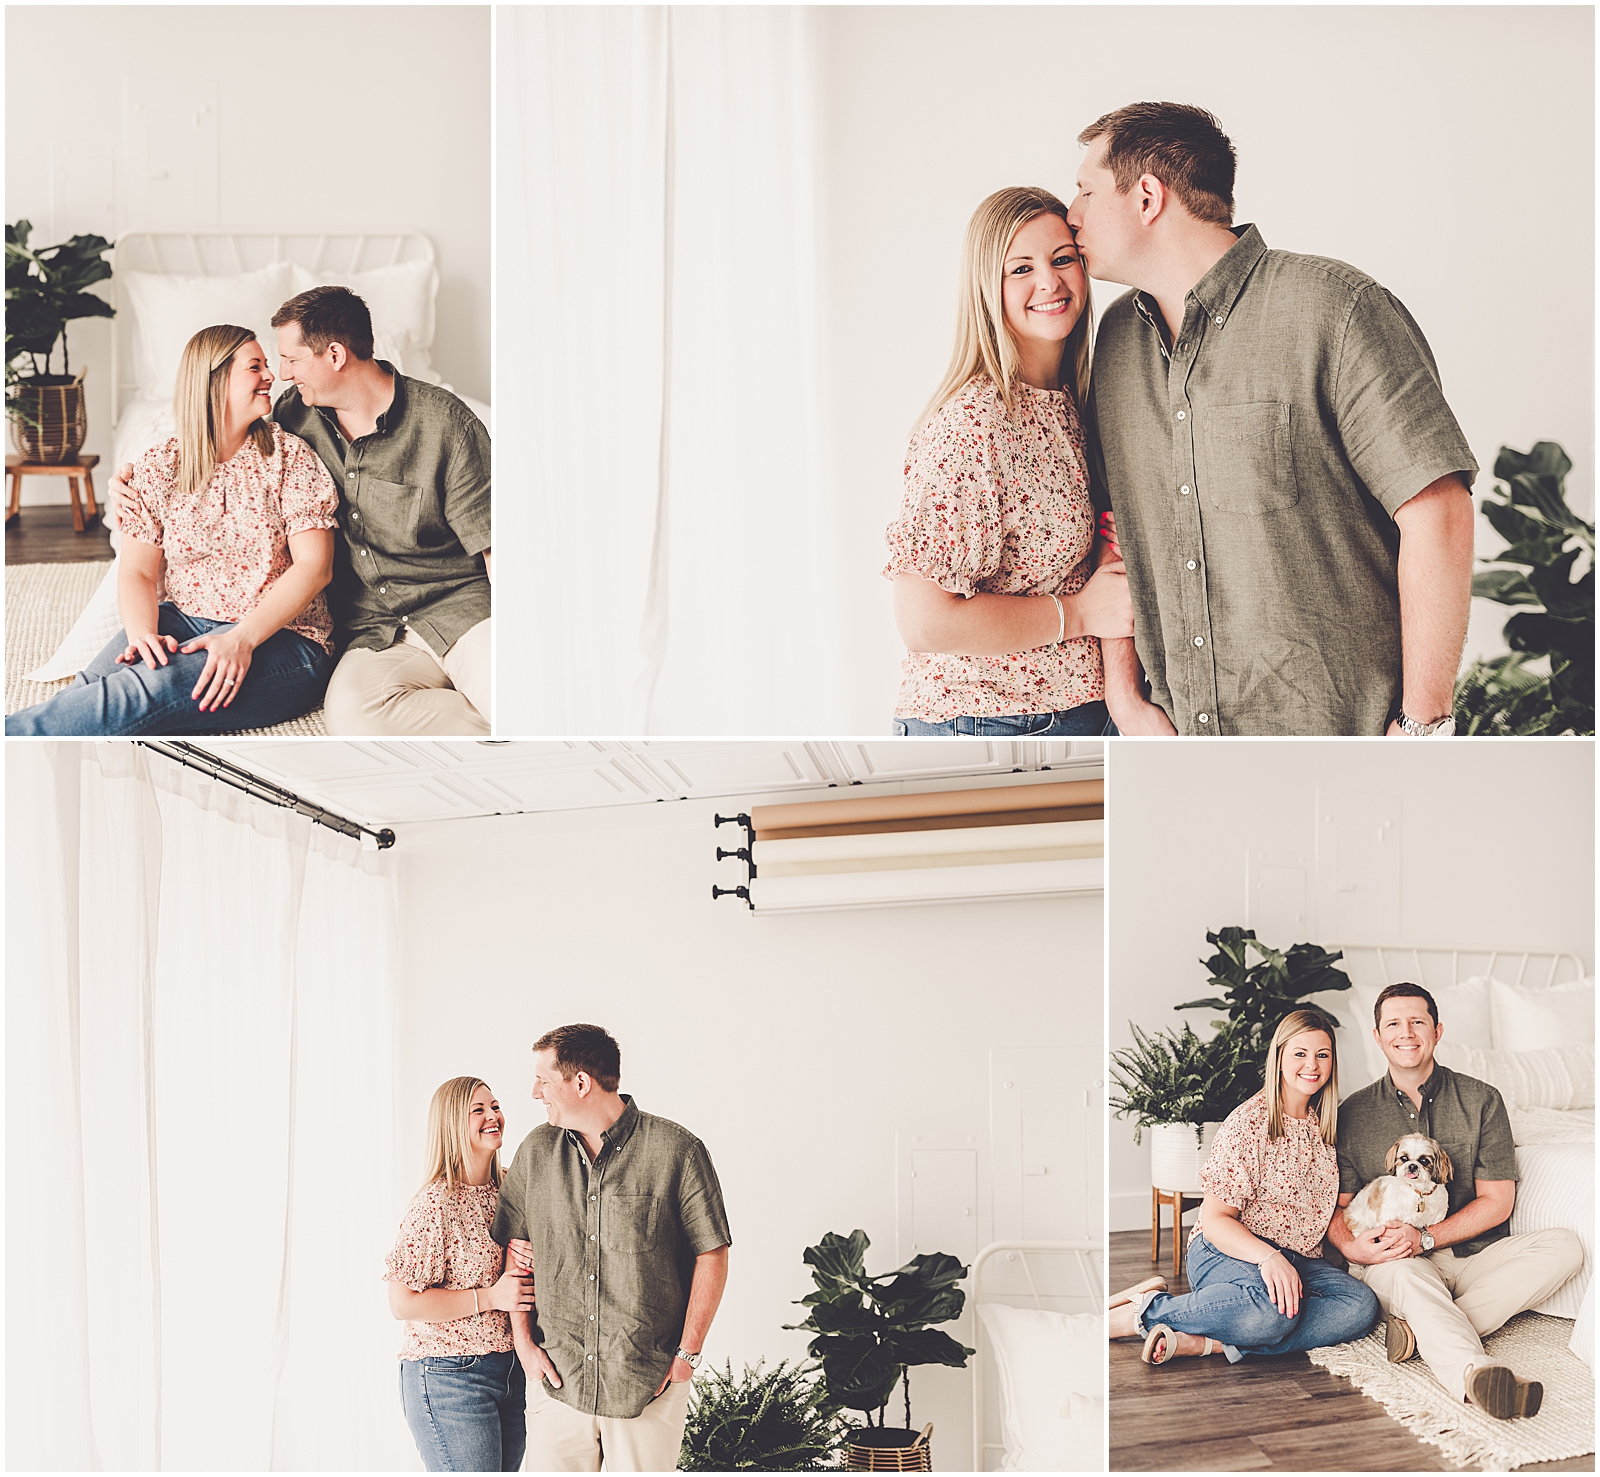 Spring couples session at the natural light Studio 388 owned by Kyle and Kara Evans at Kara Evans Photographer in Kankakee, Illinois.